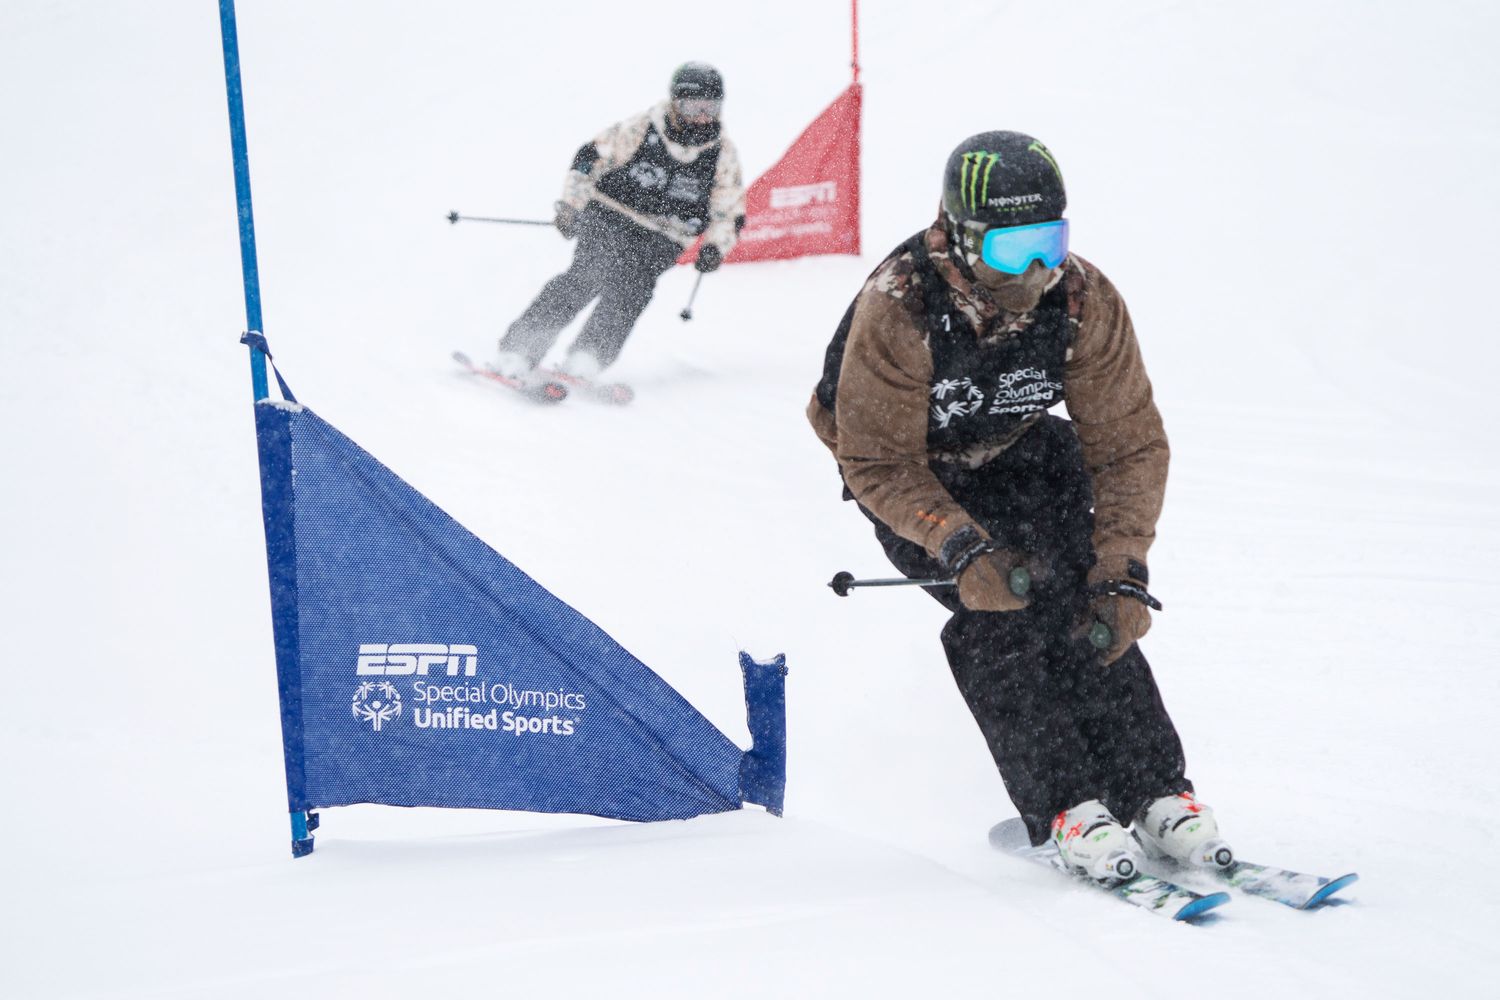 special olympics unified skiing and snowboarding